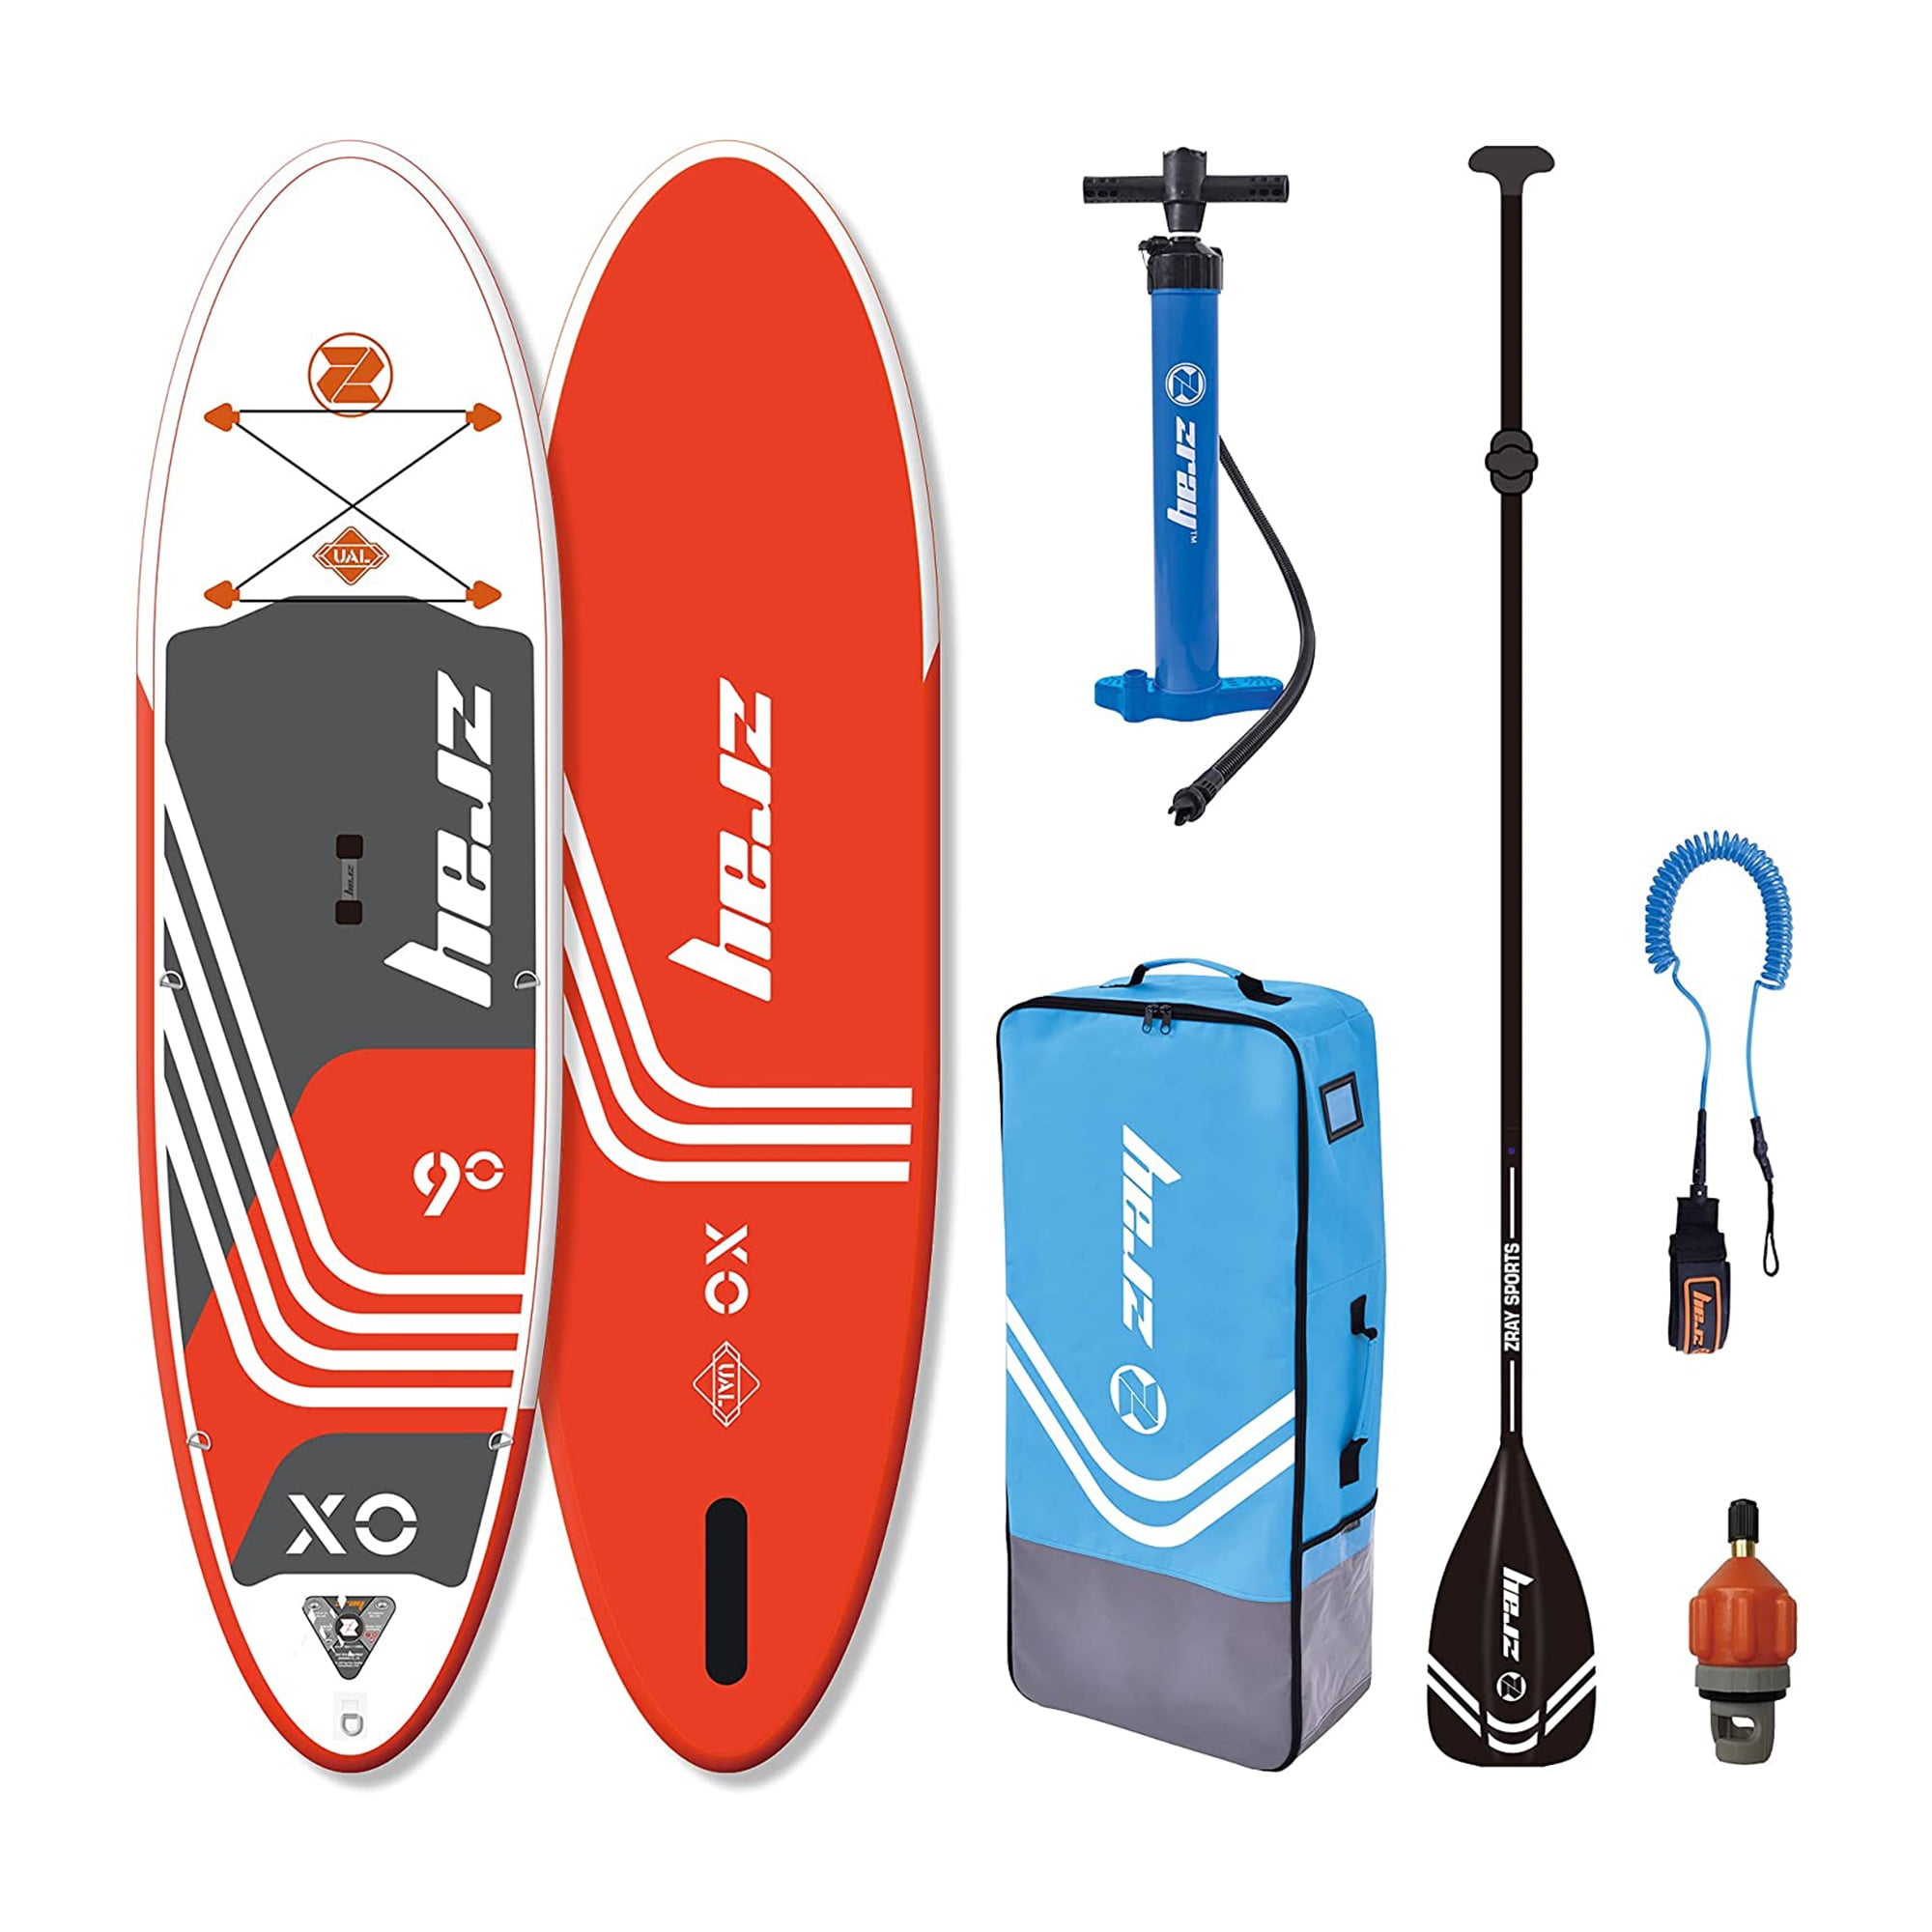 Zray 9' X-Rider Youngr X0 Inflatable Paddle Board Kit, Red/White -